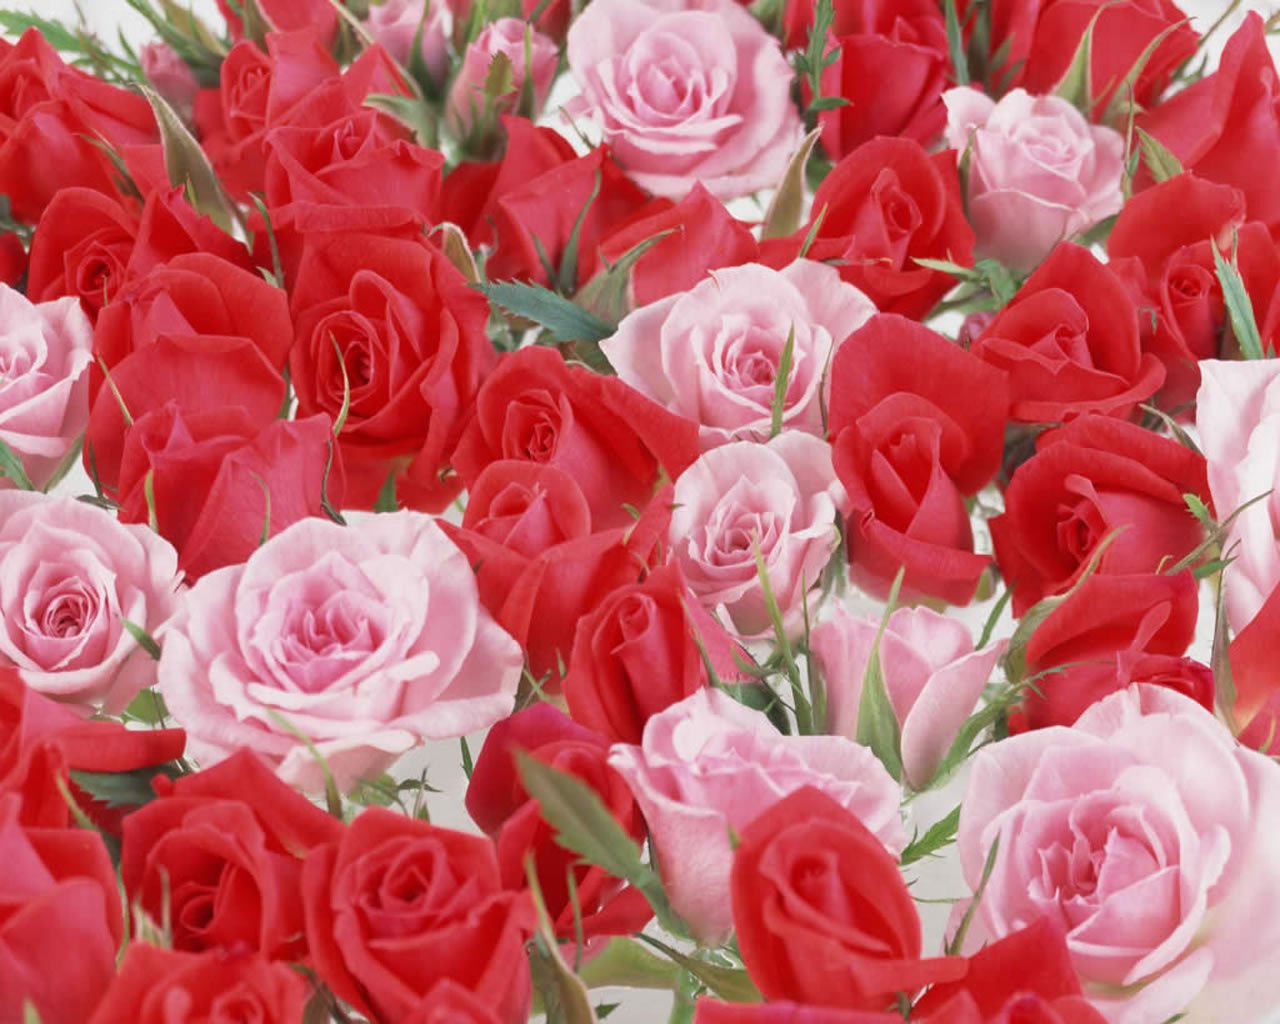 Flowers Pictures Flowers Wallpapers Red Roses